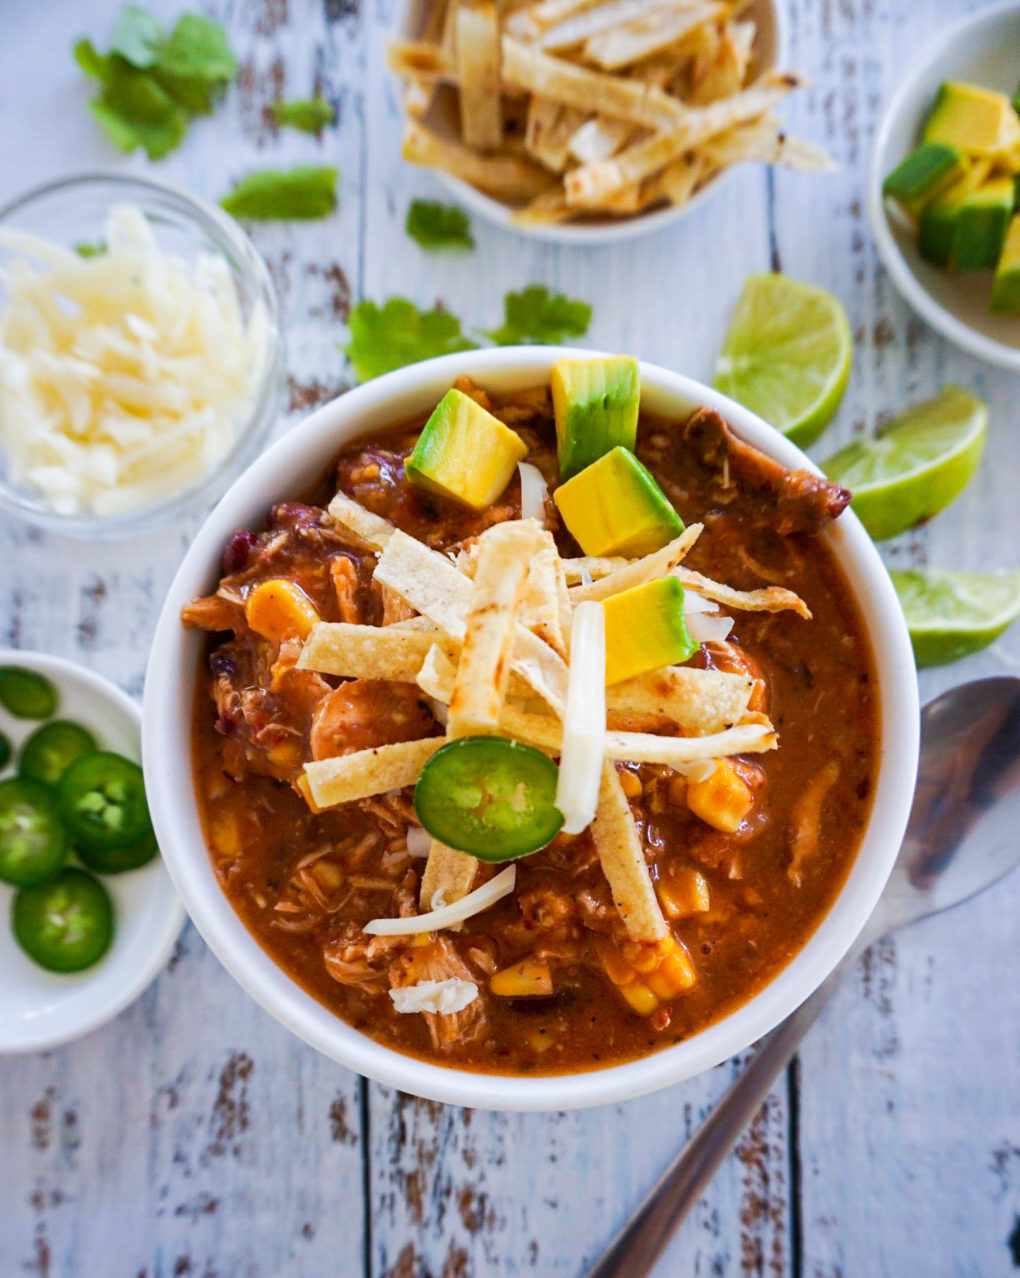 Tortilla soup - another healthy recipe by Familicious